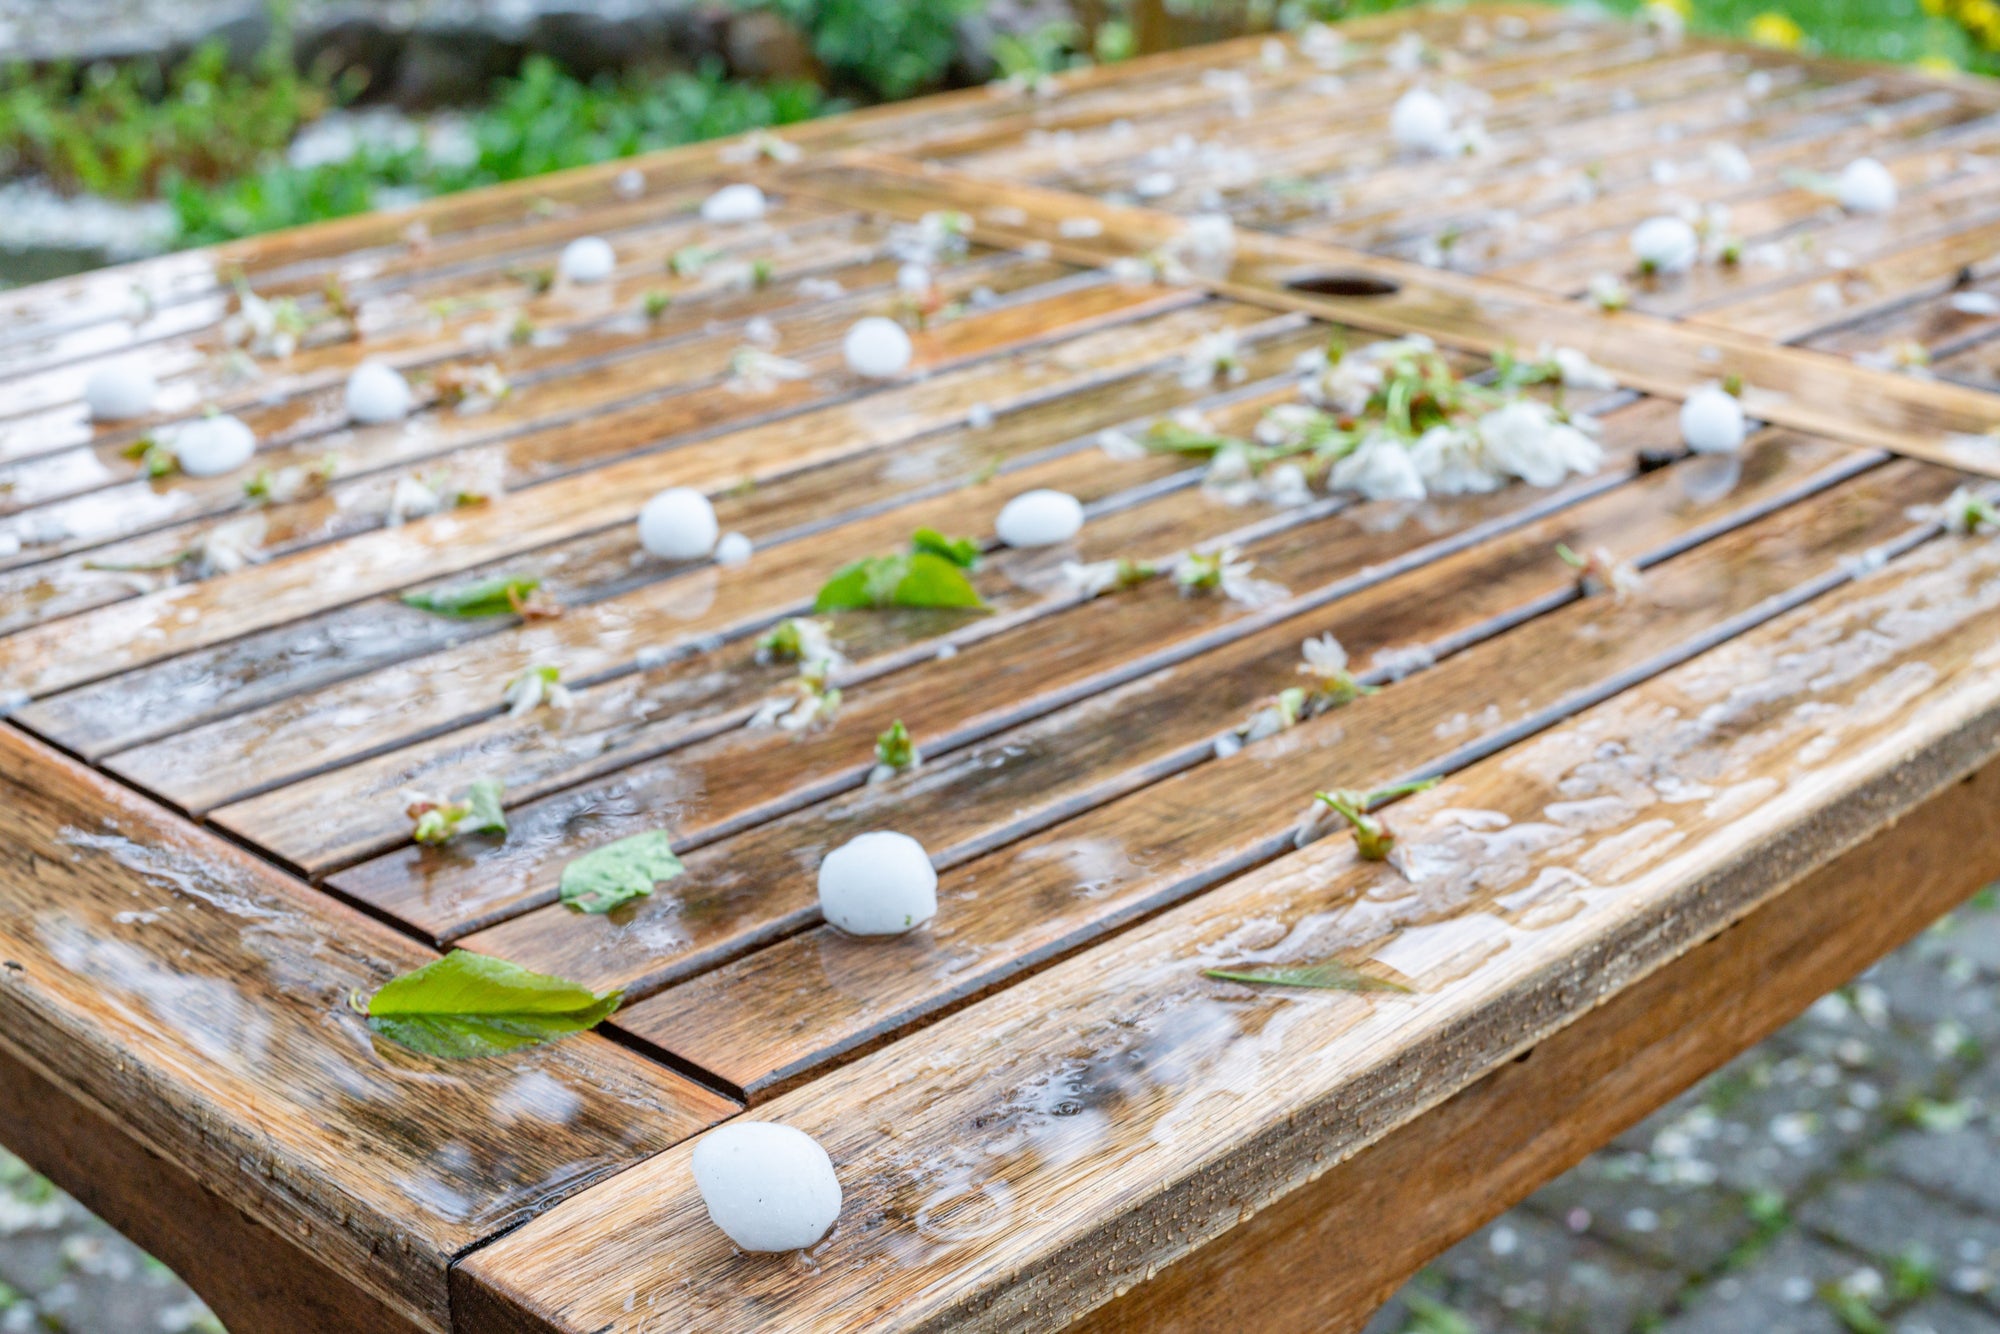 Reviving Your Garden After Hail